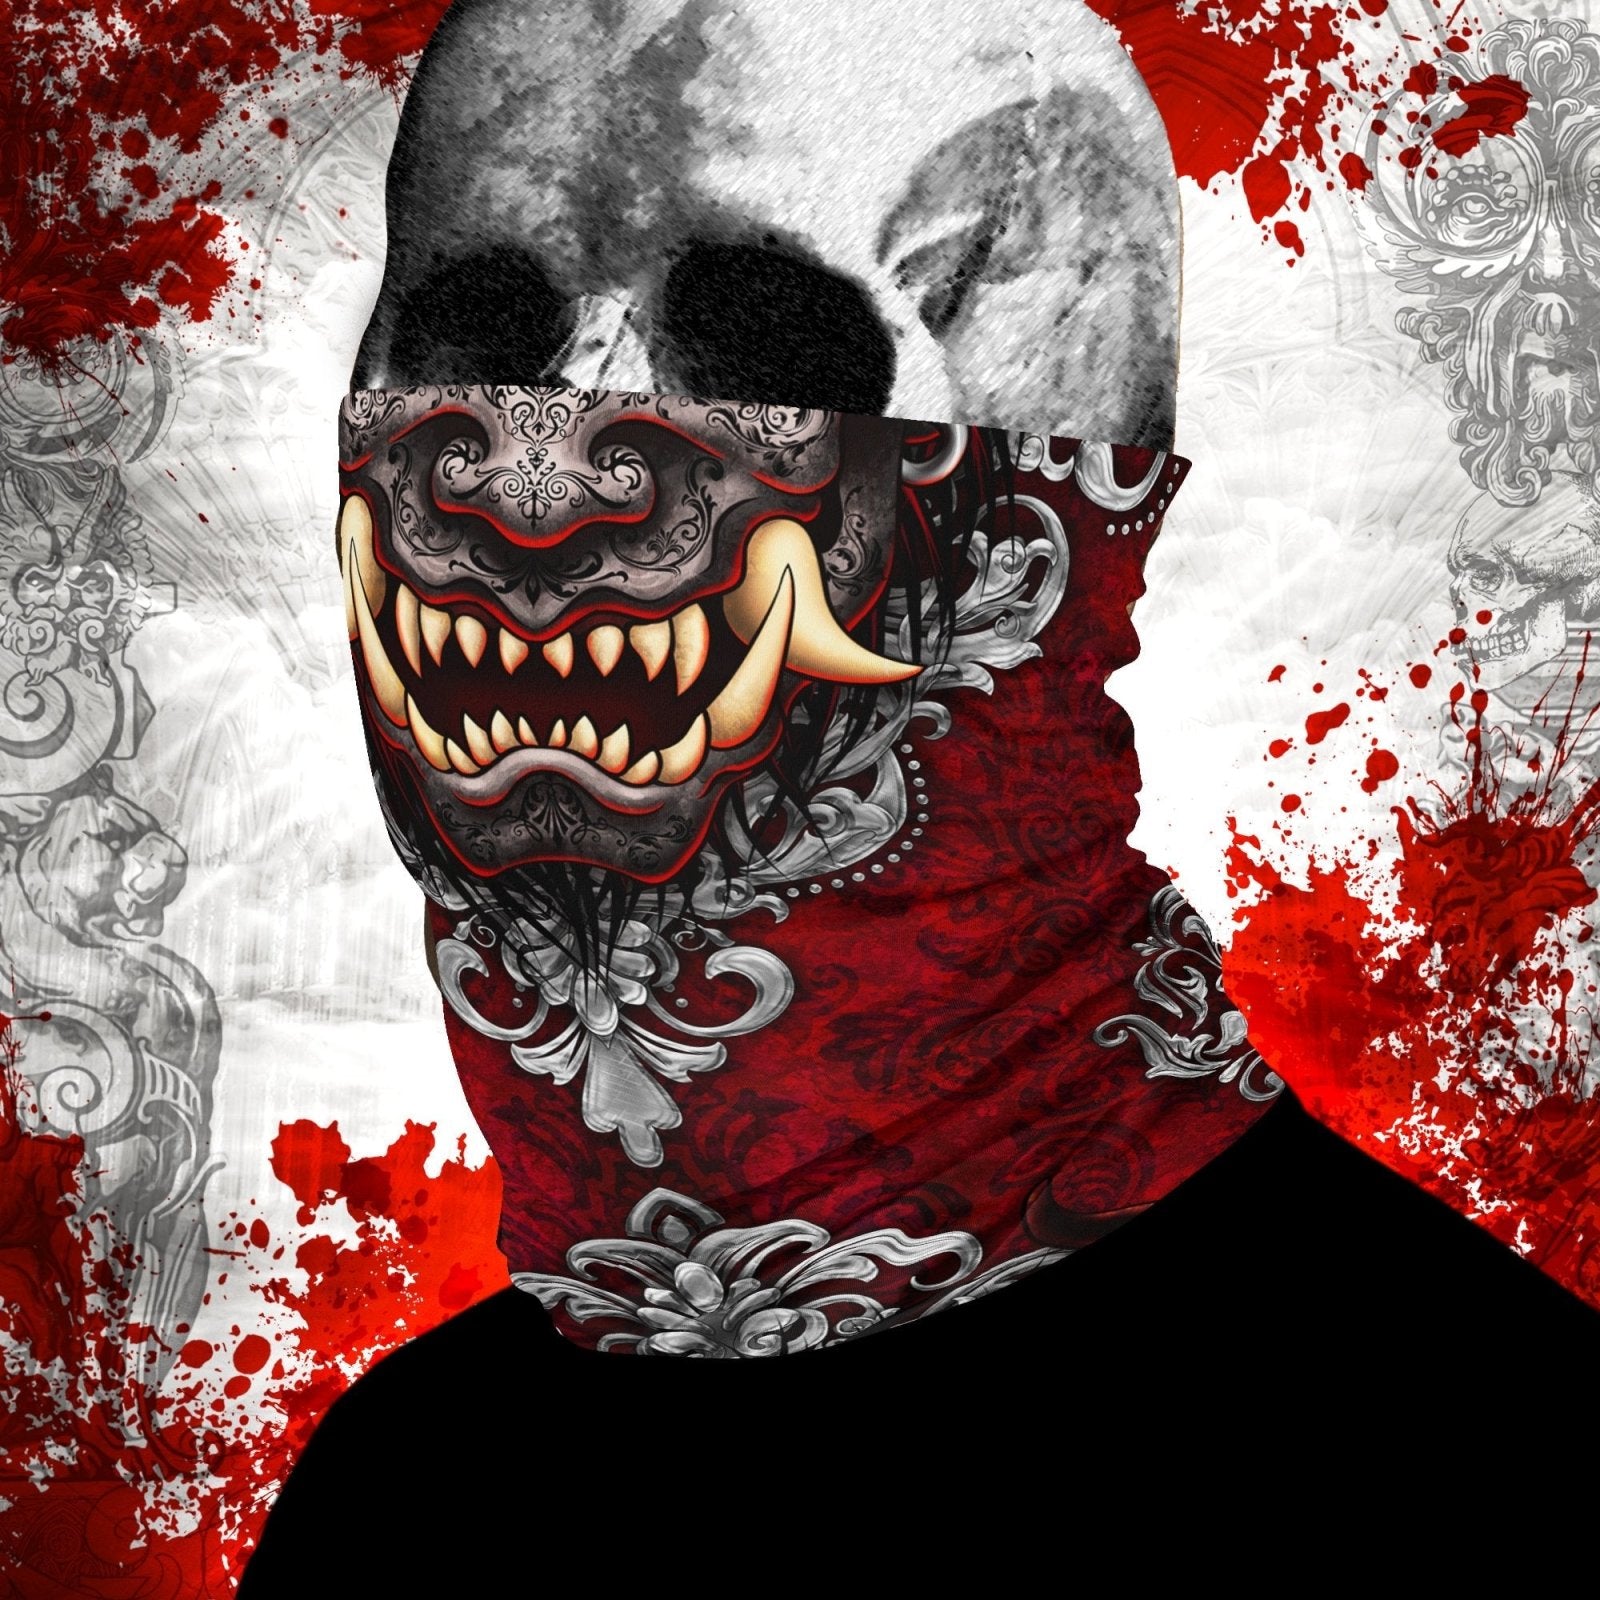 Demon Neck Gaiter, Face Mask, Head Covering, Japanese Oni, Gothic, Fangs, Horns Headband - Goth - Abysm Internal